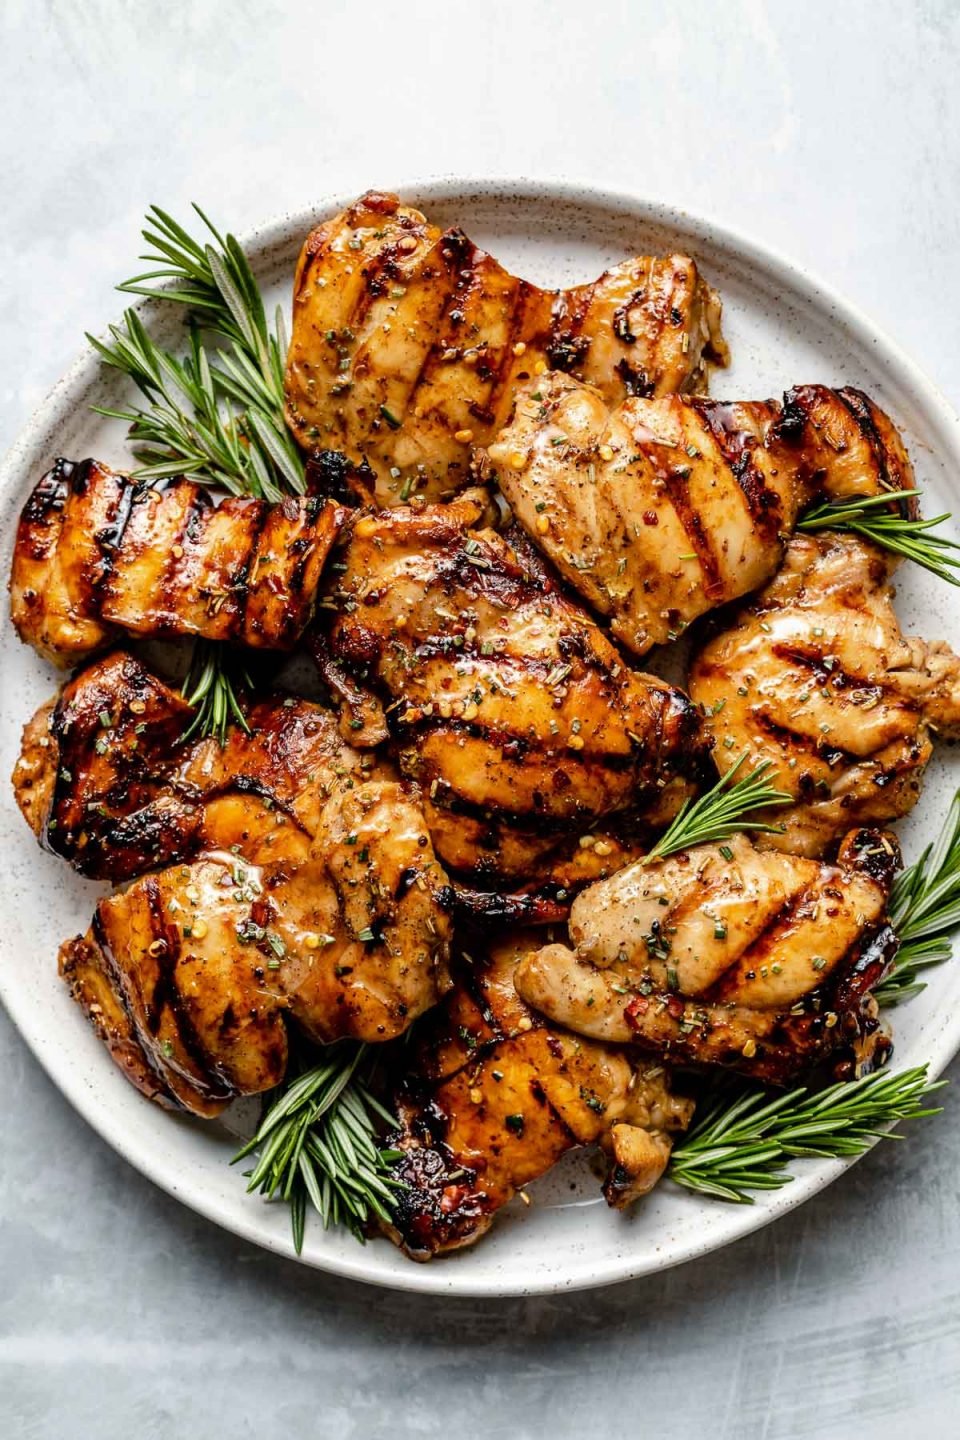 Grilled brown sugar bourbon chicken thighs shown on a white speckled plate atop a light blue surface. The chicken is garnished with fresh sprigs of rosemary.